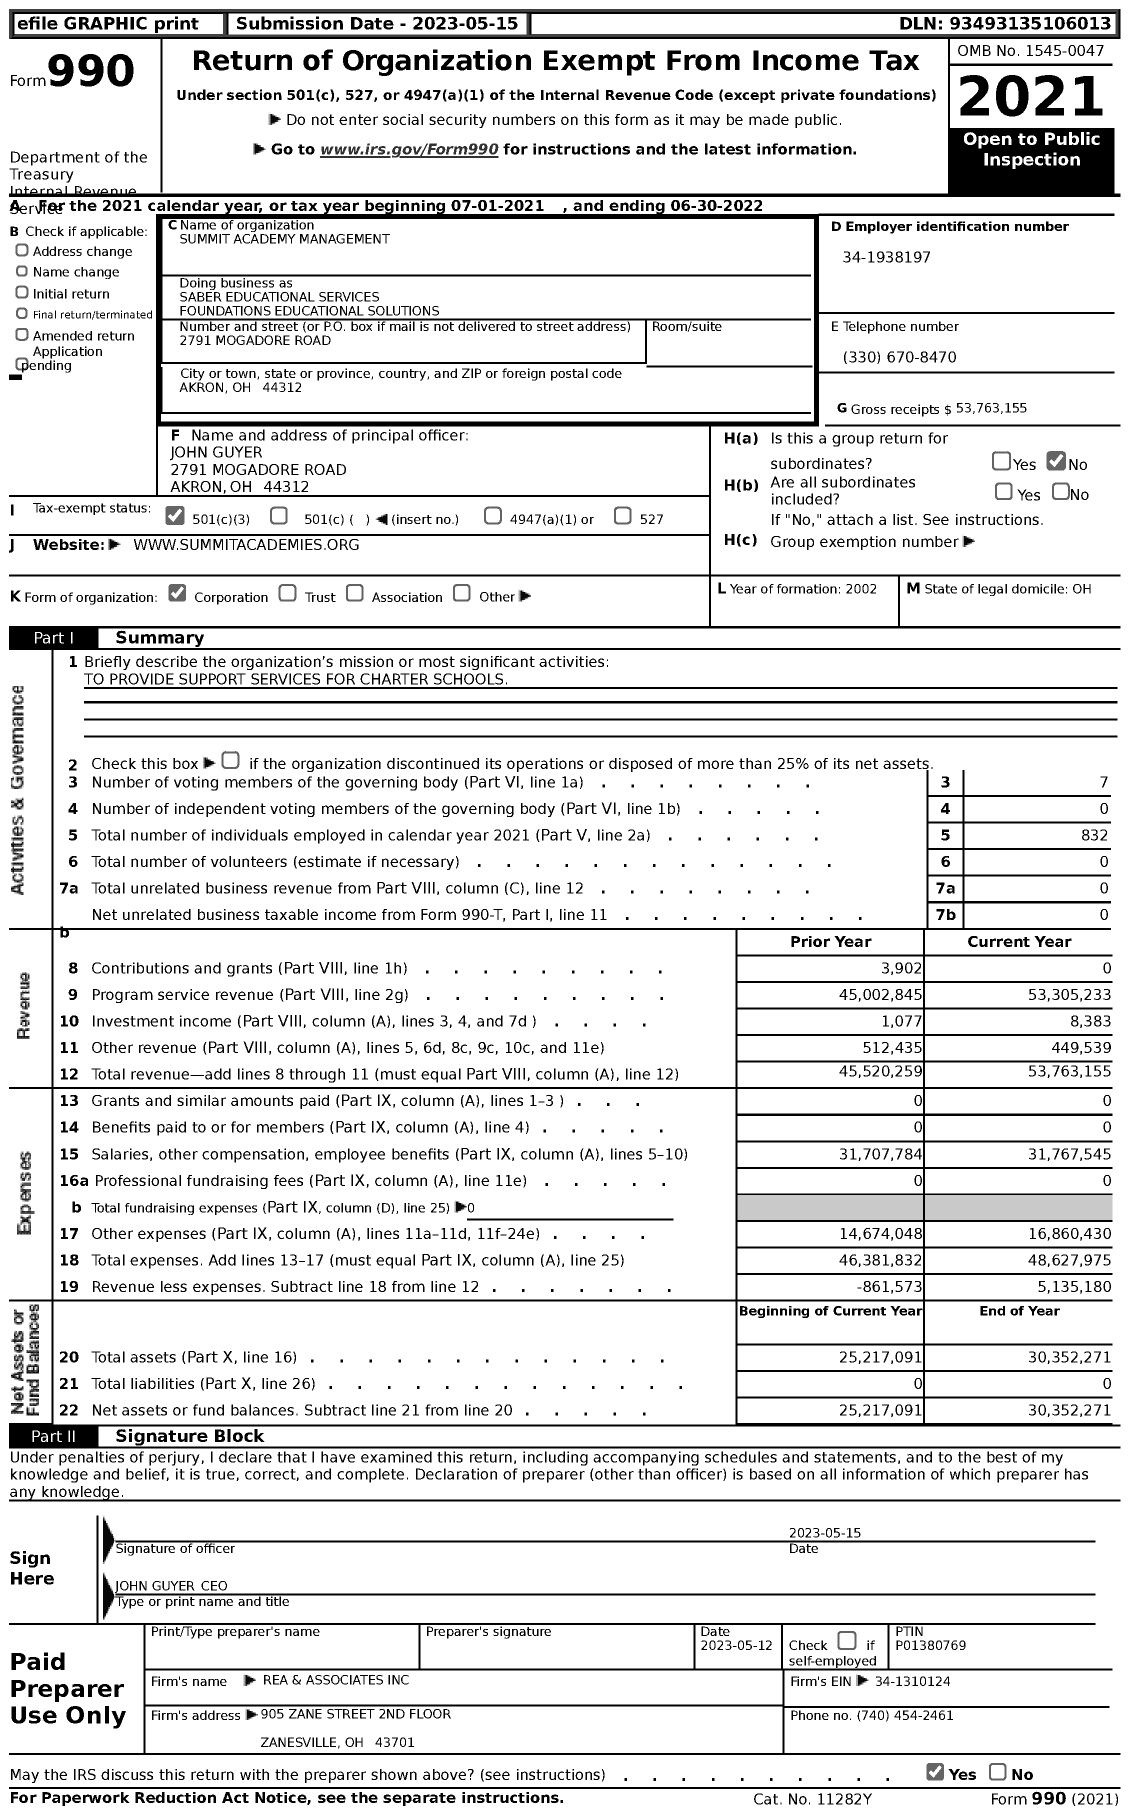 Image of first page of 2021 Form 990 for Saber Educational Services Foundations Educational Solutions